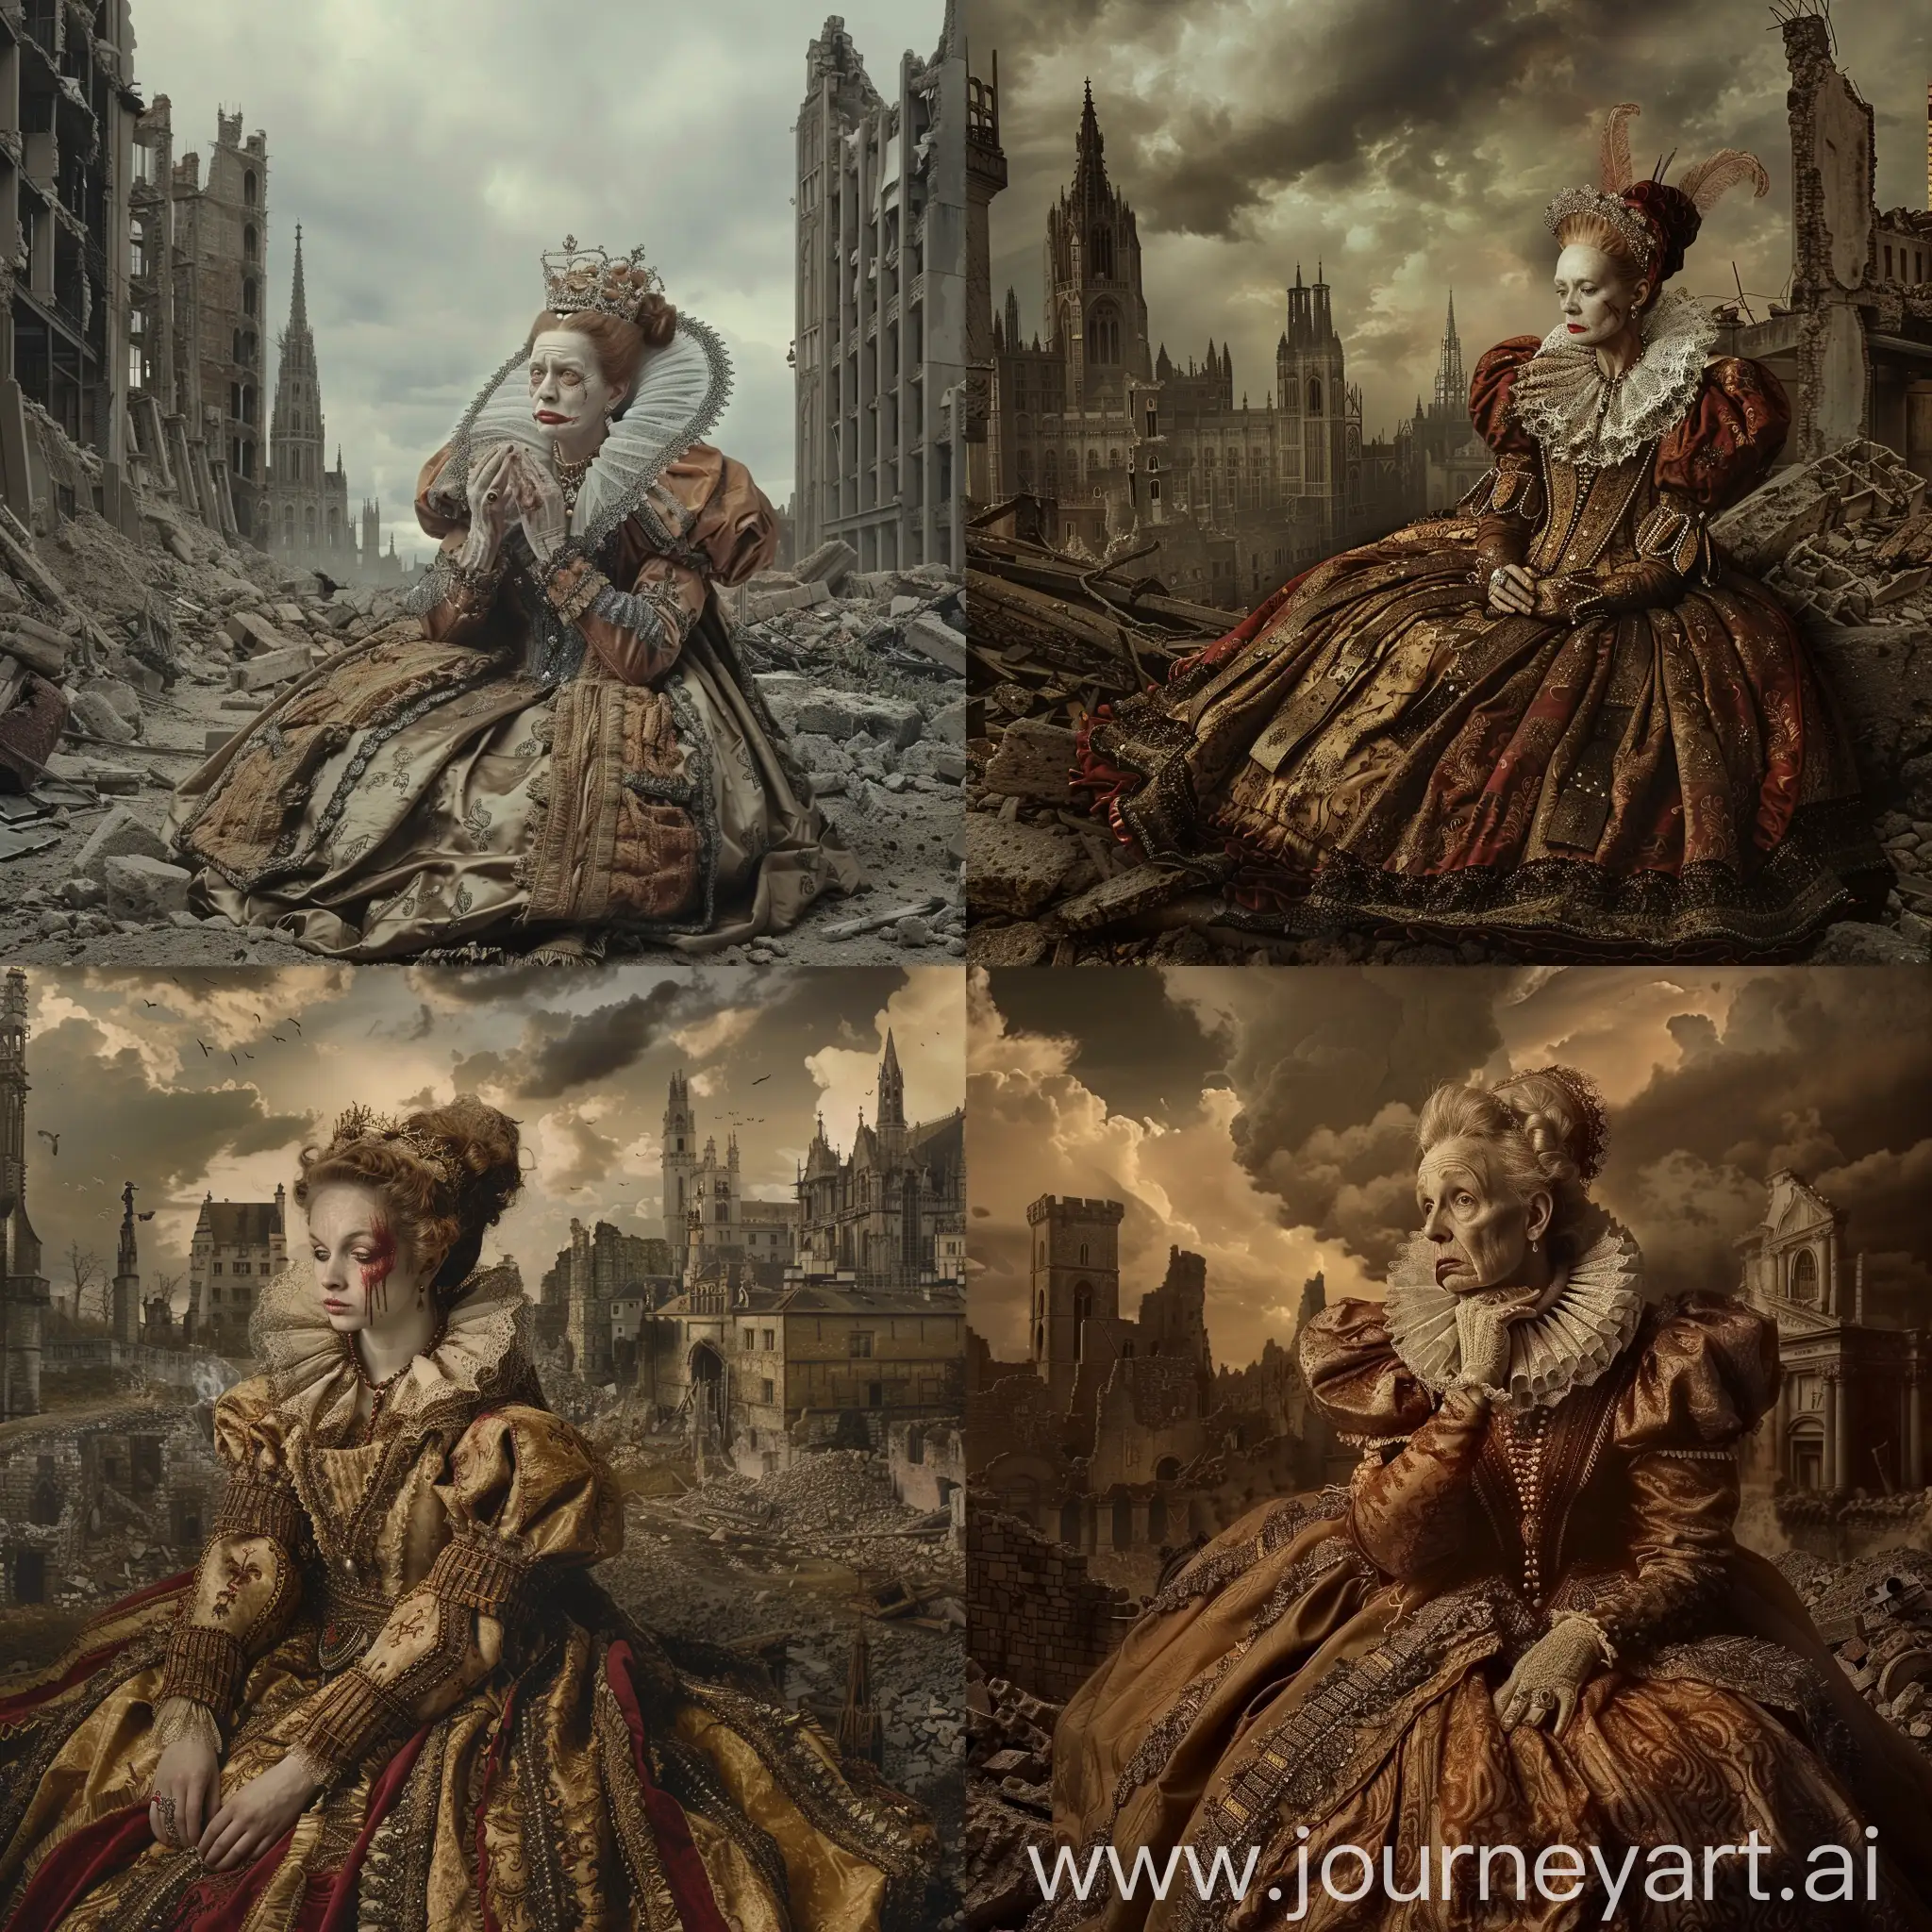 A devestated Elizabethan queen in the ruins of a city